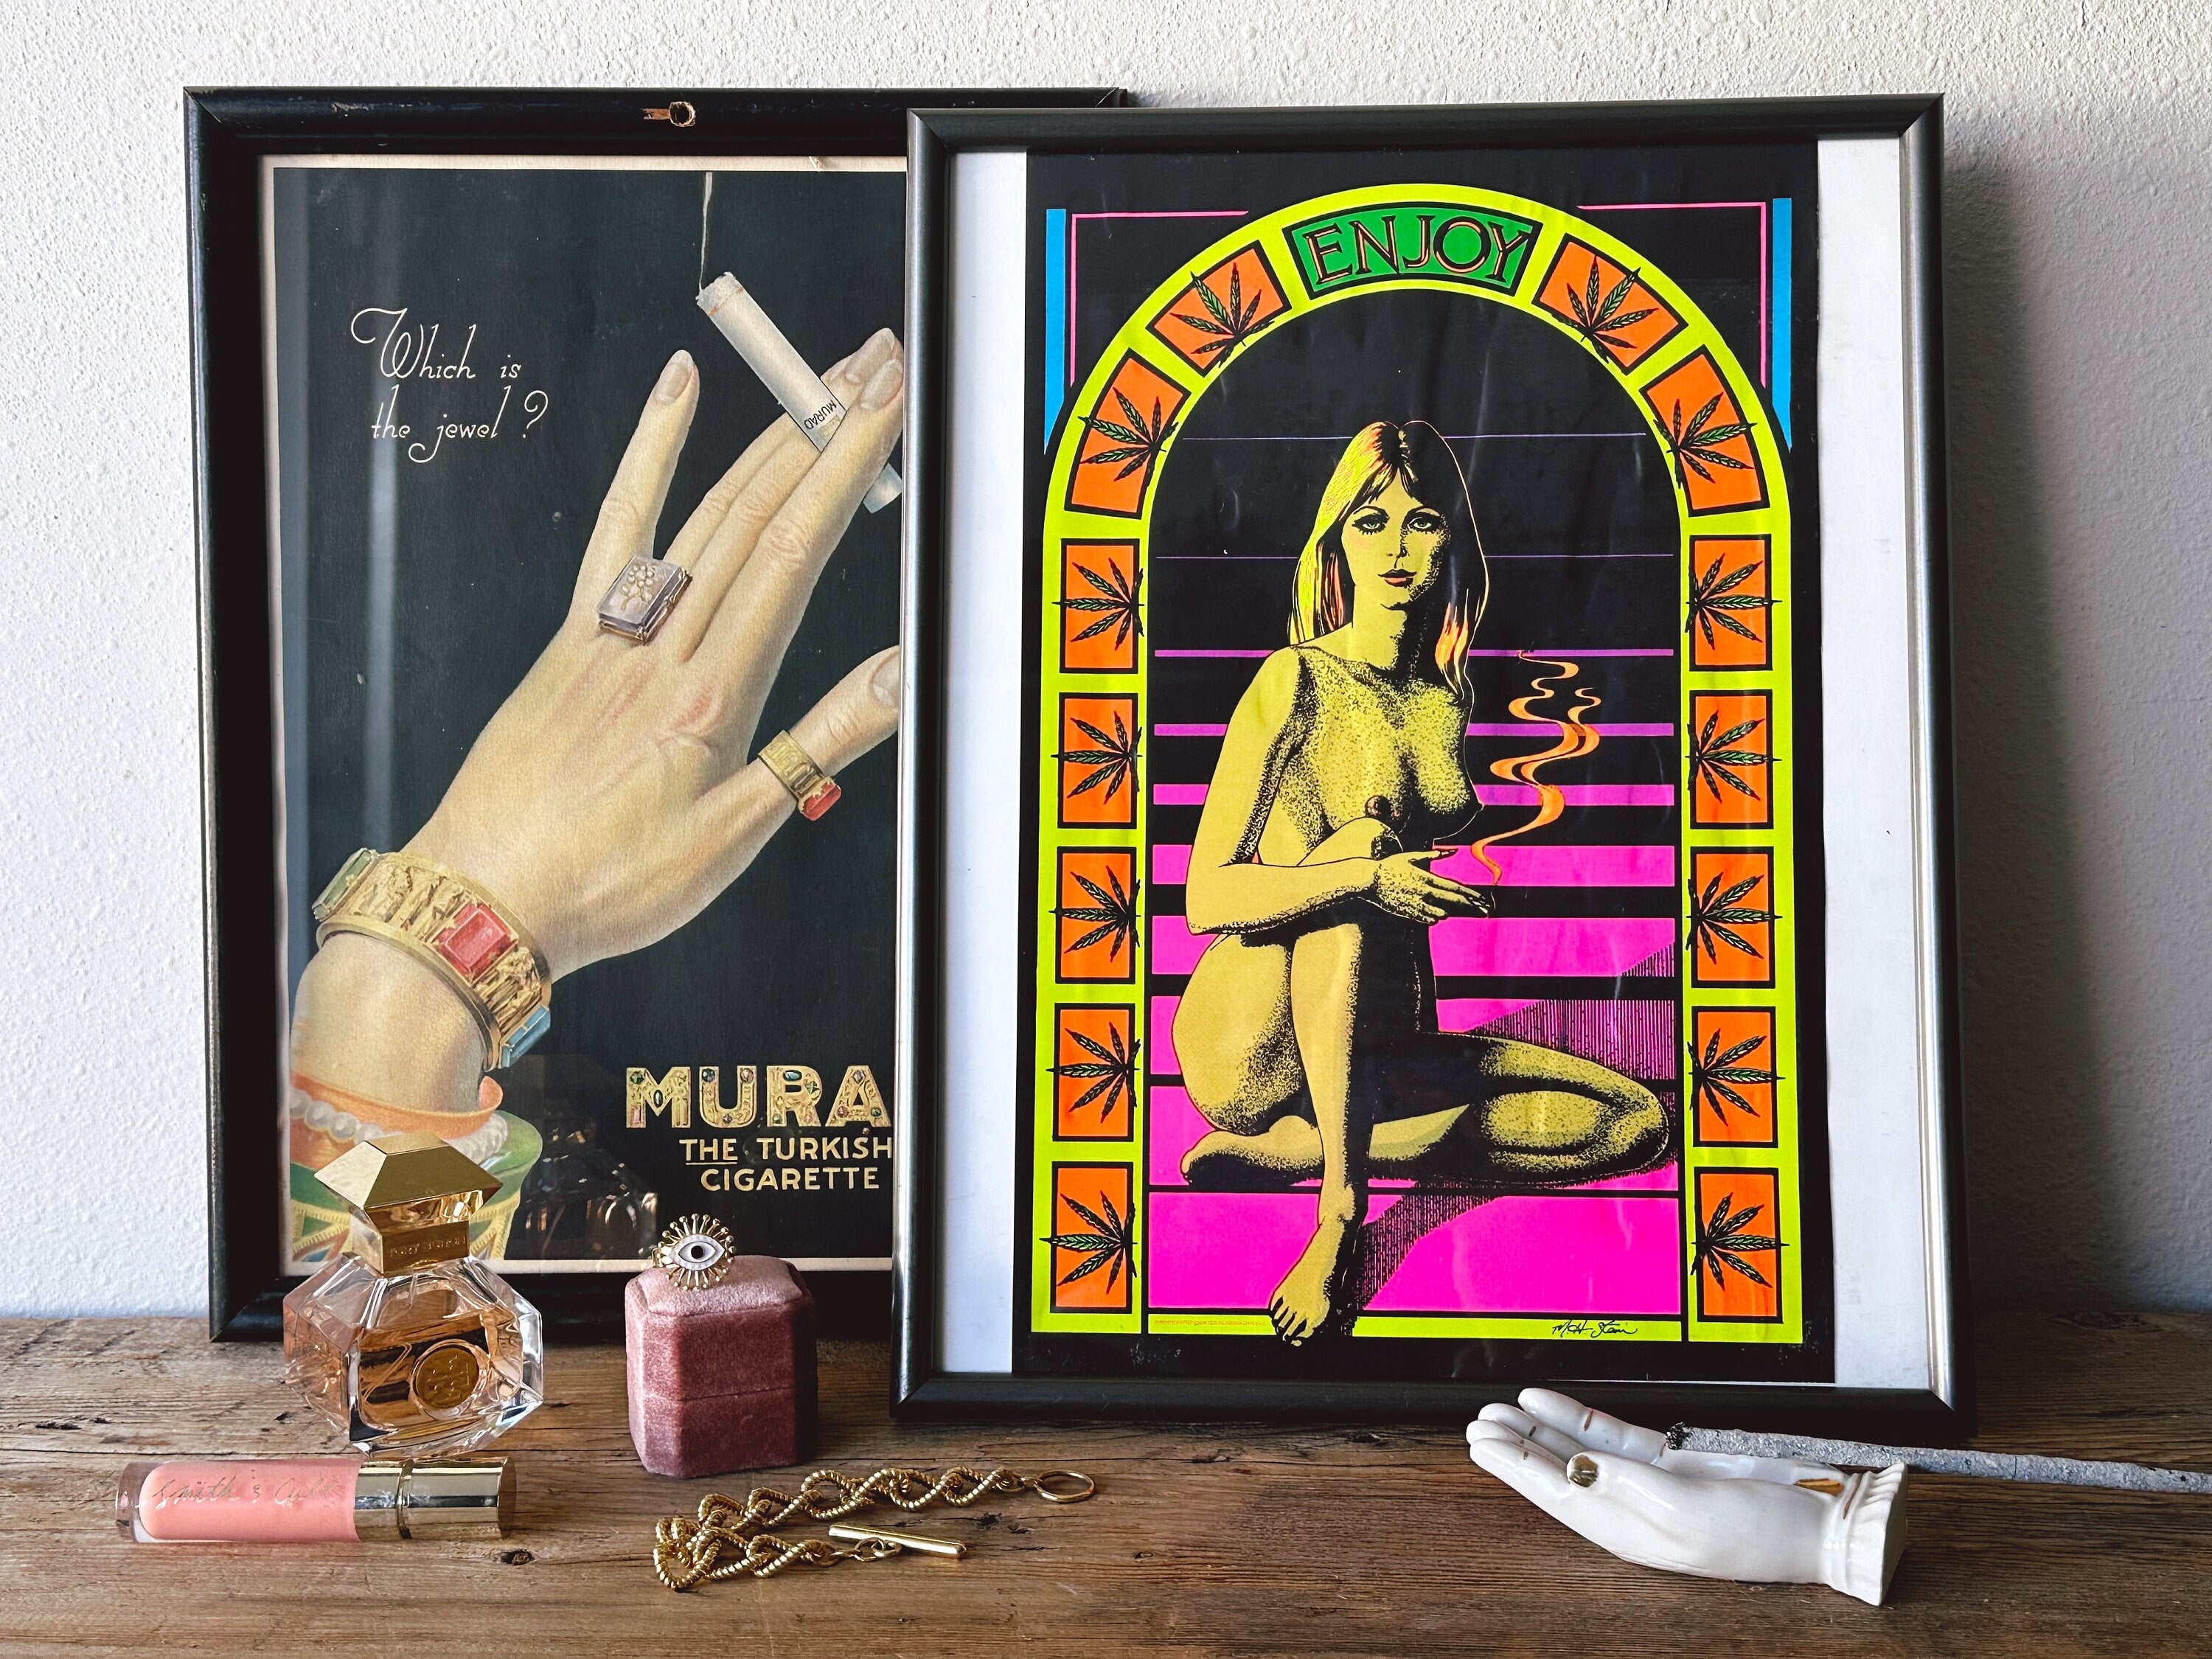 Antique Murad Turkish Cigarettes Advertising Poster in Wooden Frame | Vintage Tobacciana Art Collectible Advertisement | Gallery Wall Art